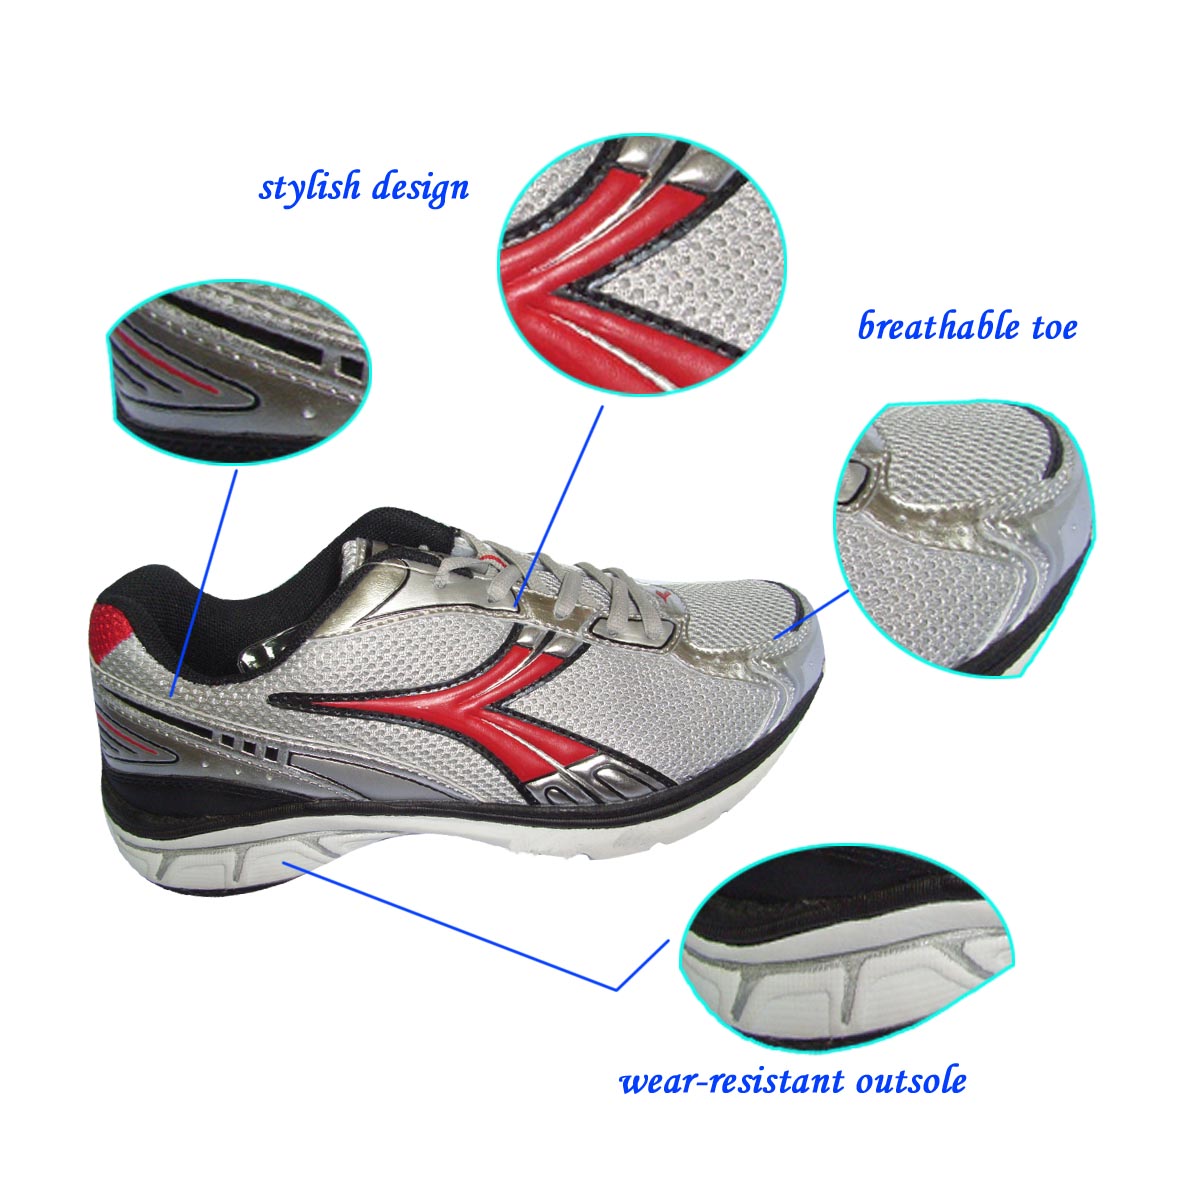 2018 Fashionable Designed Men's Breathable Sport Running Shoes with Bright Upper and Wear-resistant MD Outsole